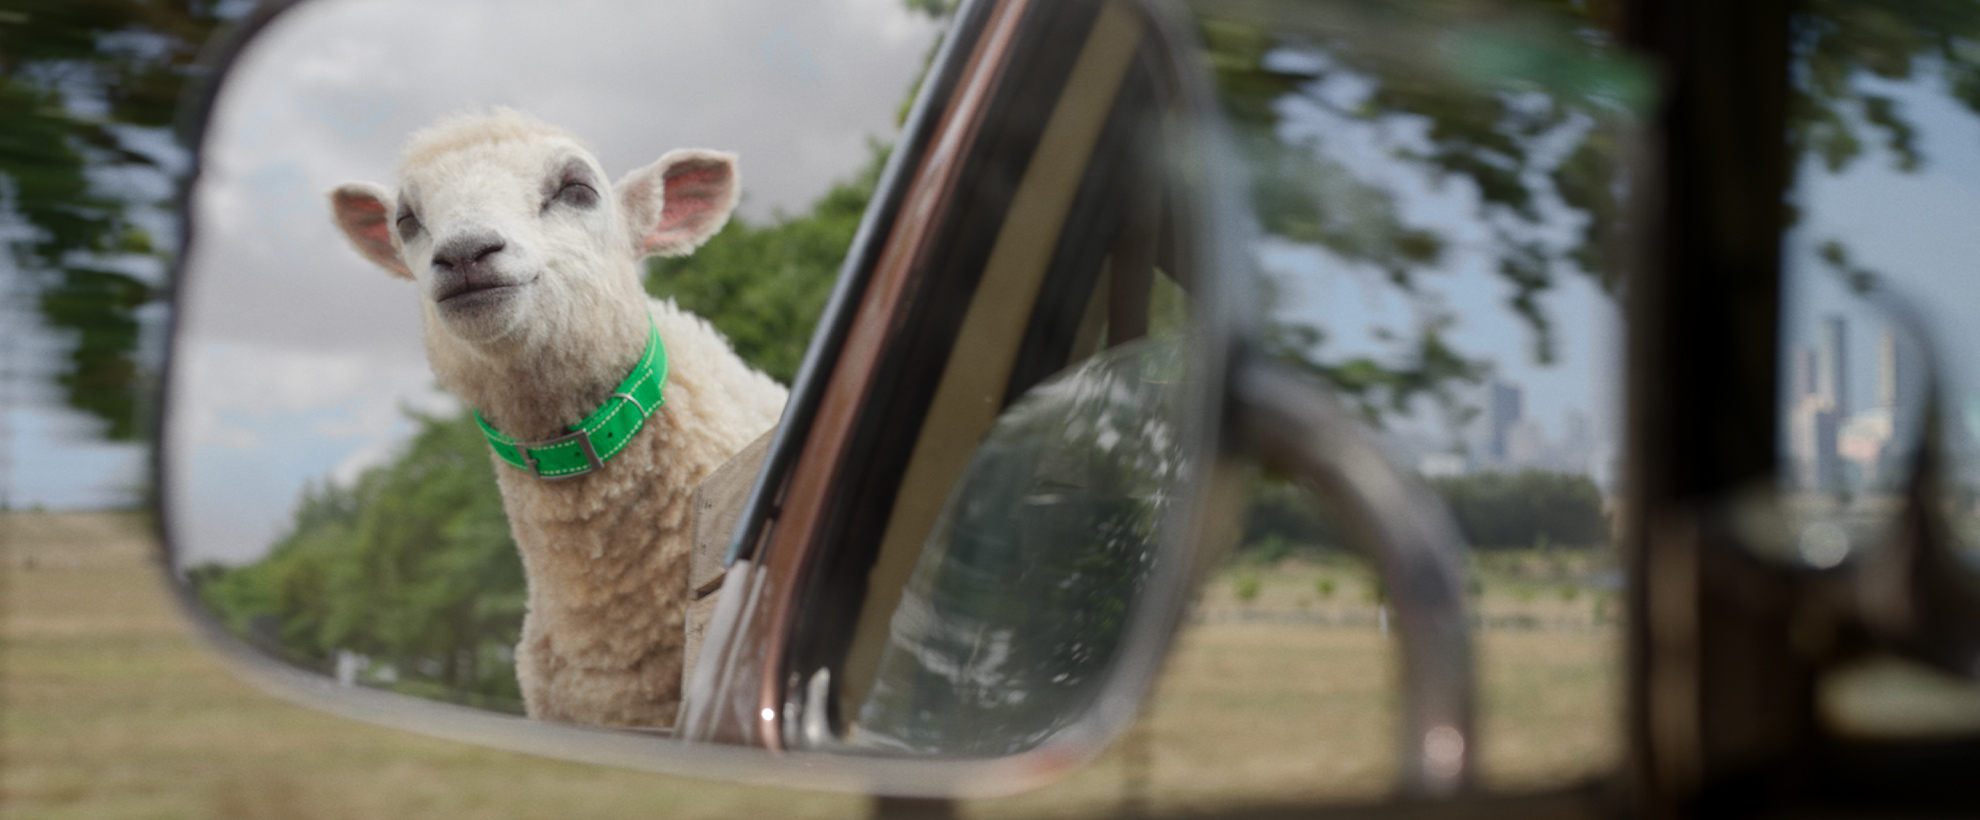 A sheep pokes their head out of a moving car window